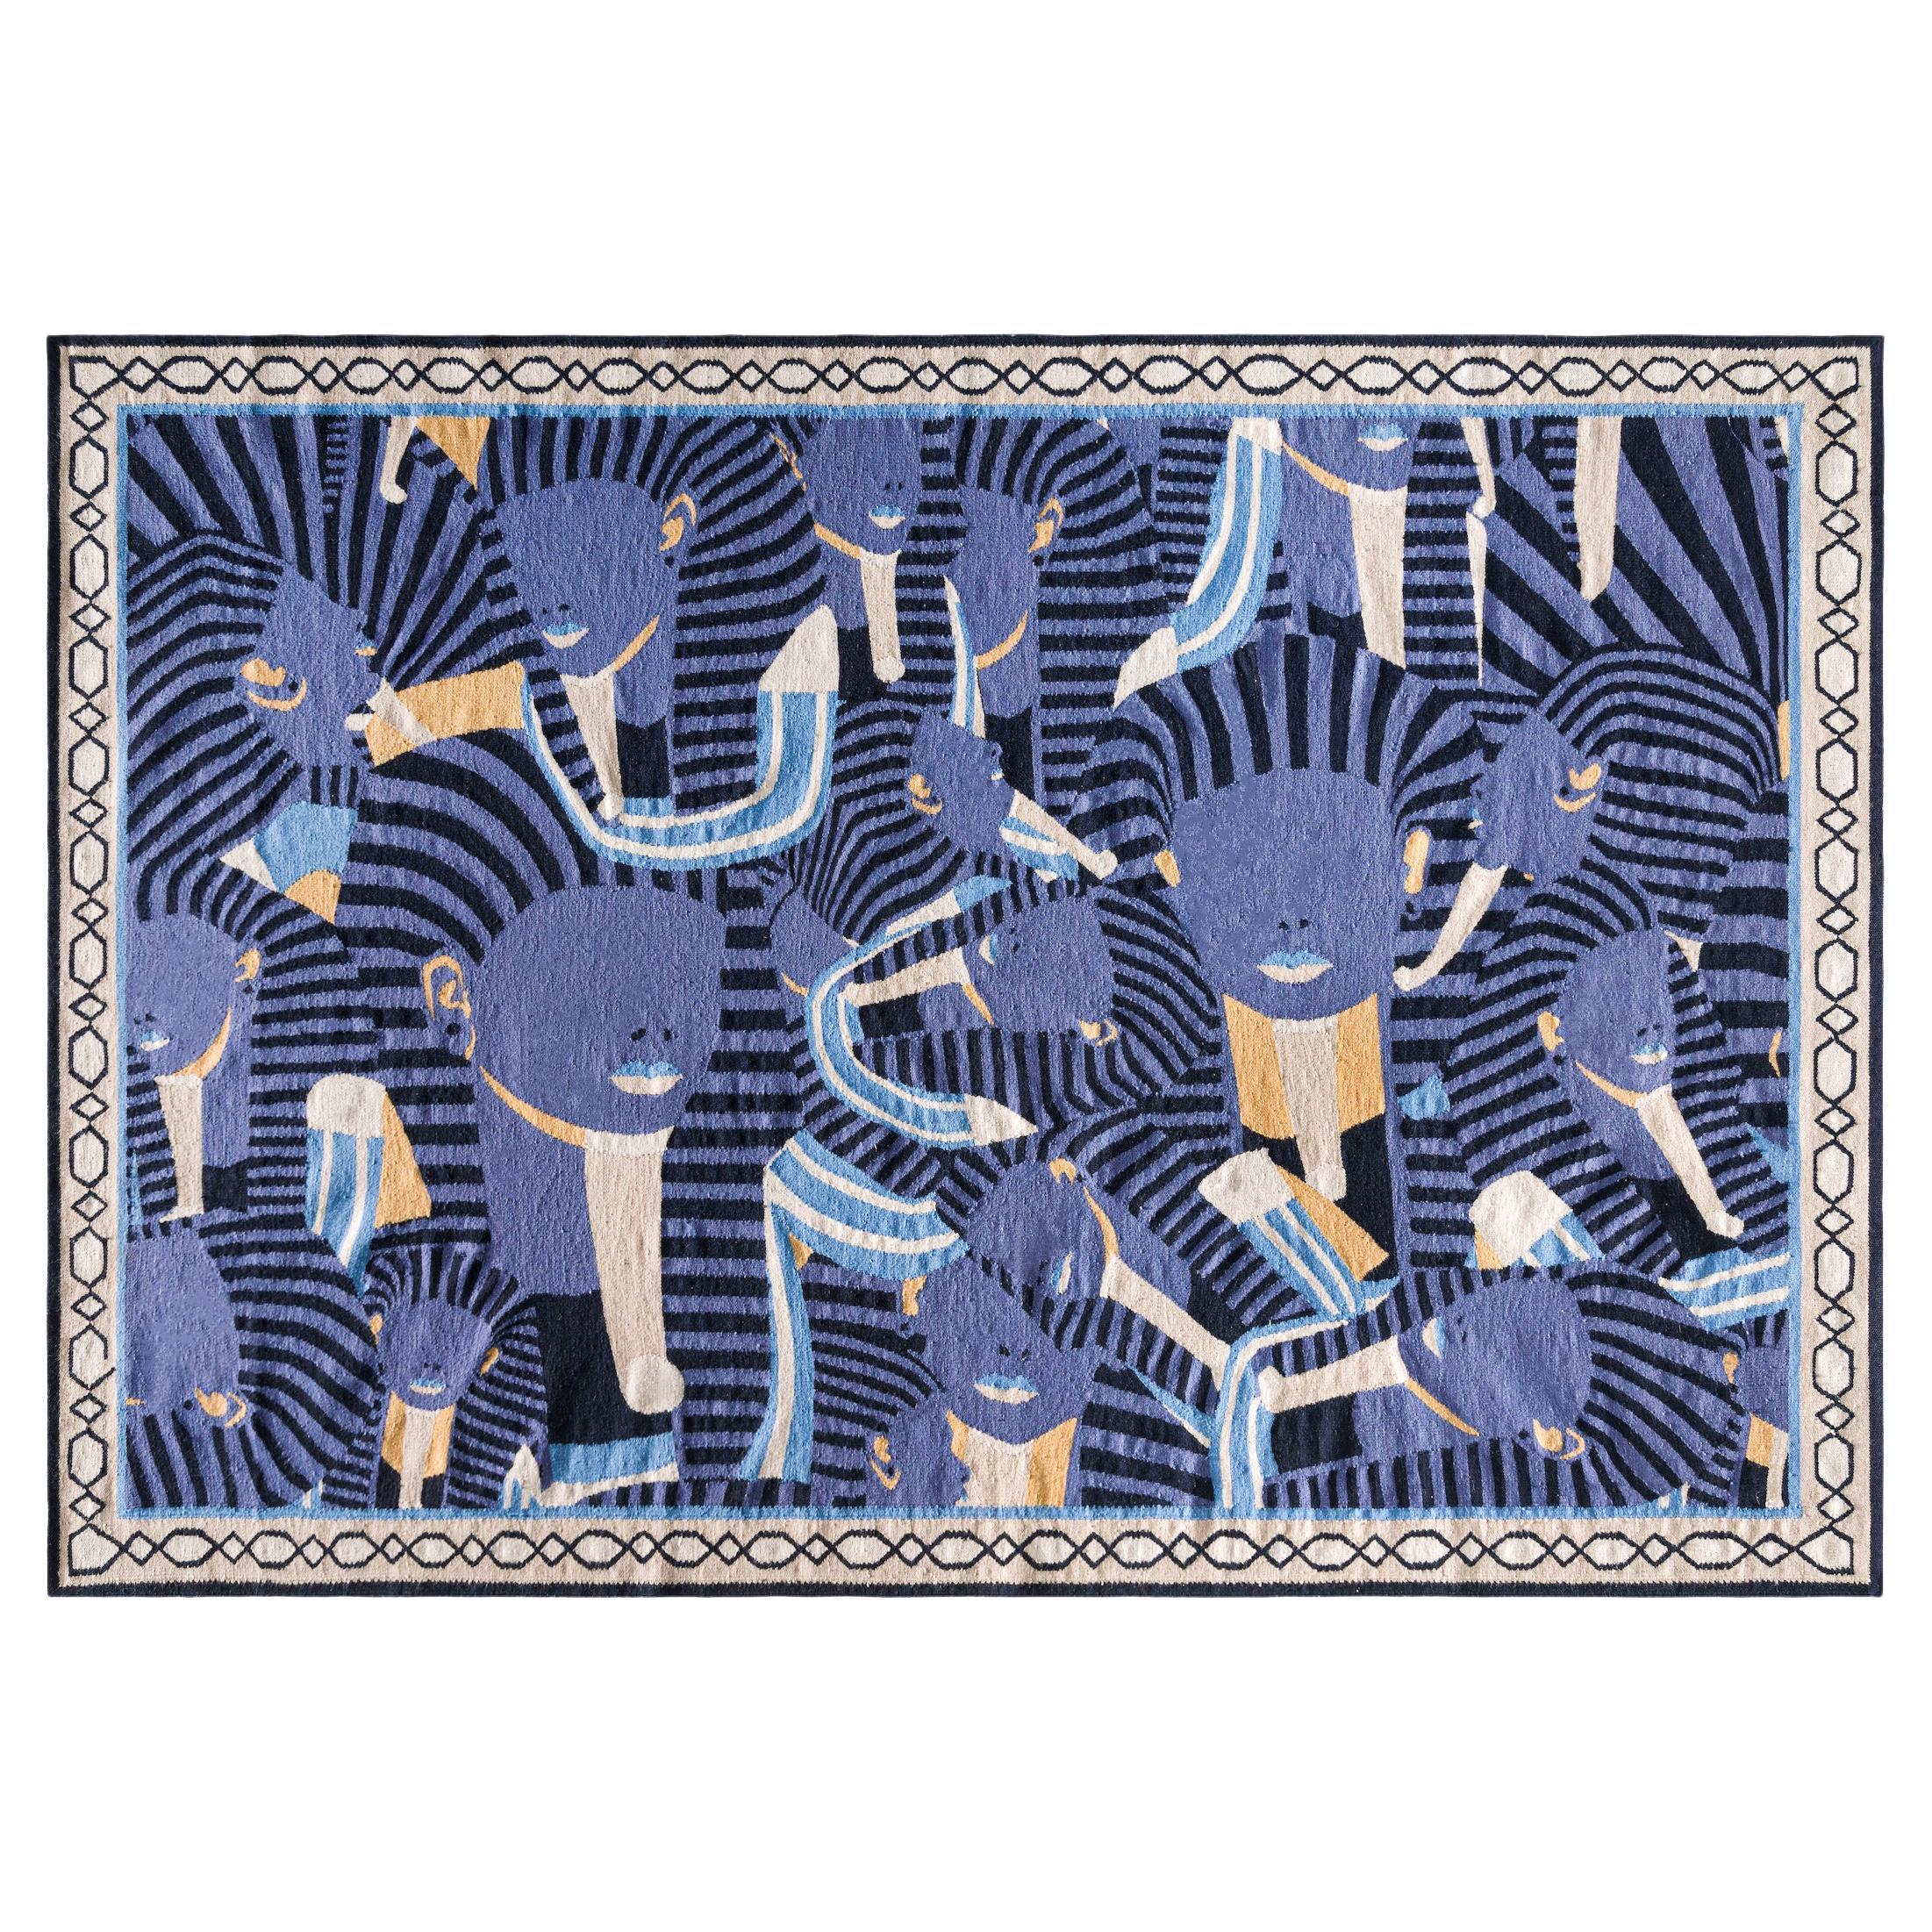 Kahhal Looms Swirling Legacy "Night" Hand-Woven Tapestry by Louis Barthélemy